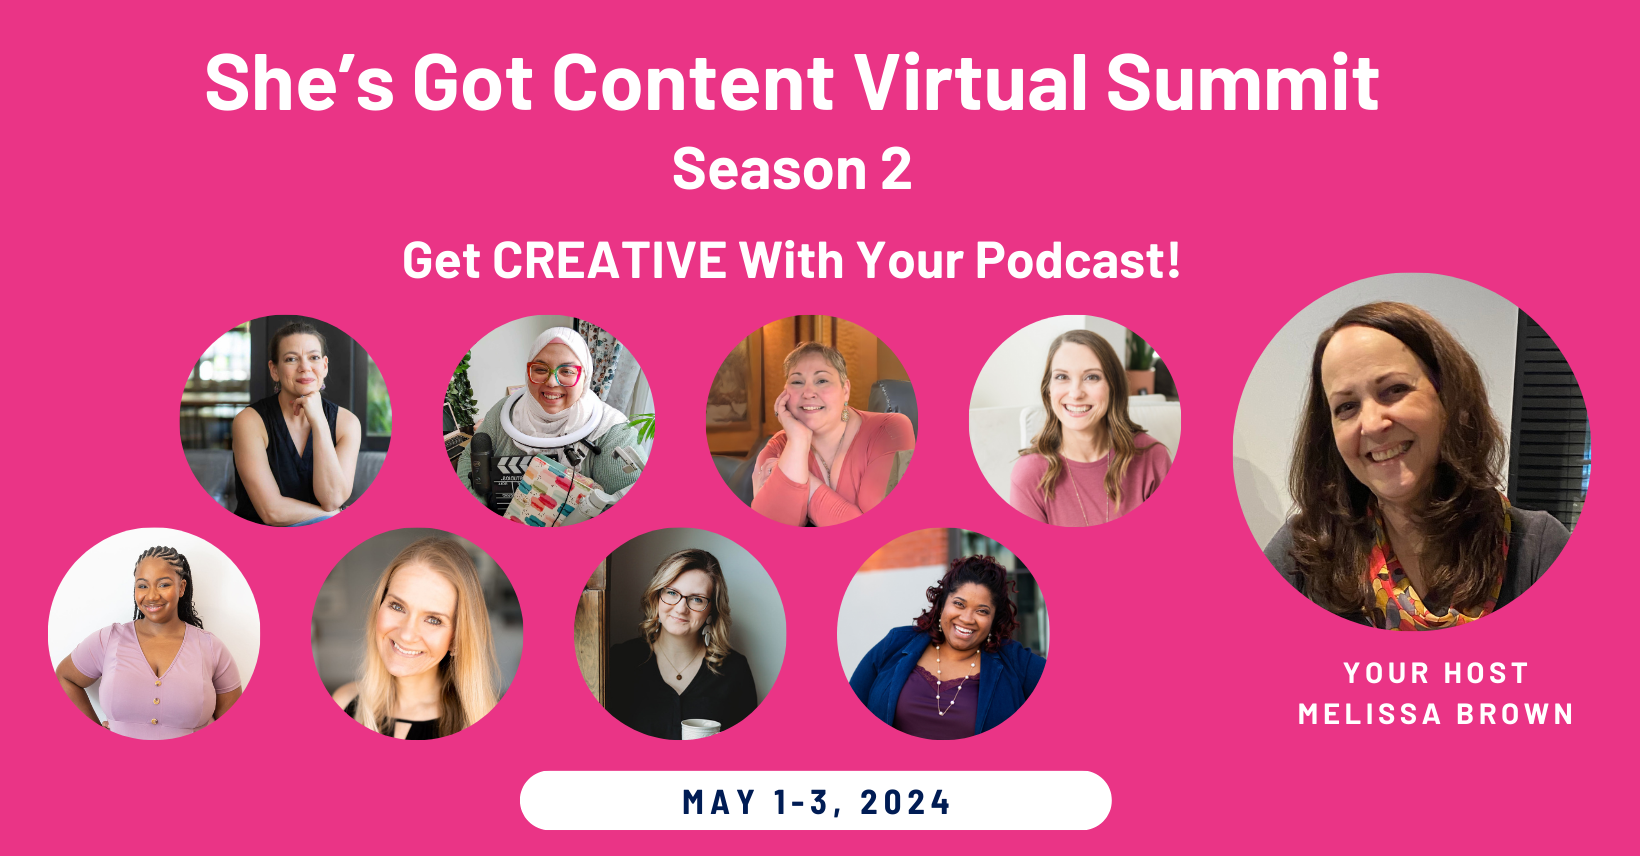 Promotional graphic for "she's got content virtual summit season 2" featuring host melissa brown and eight diverse women speakers, set for may 1-3, 2024, focusing on podcast creativity.